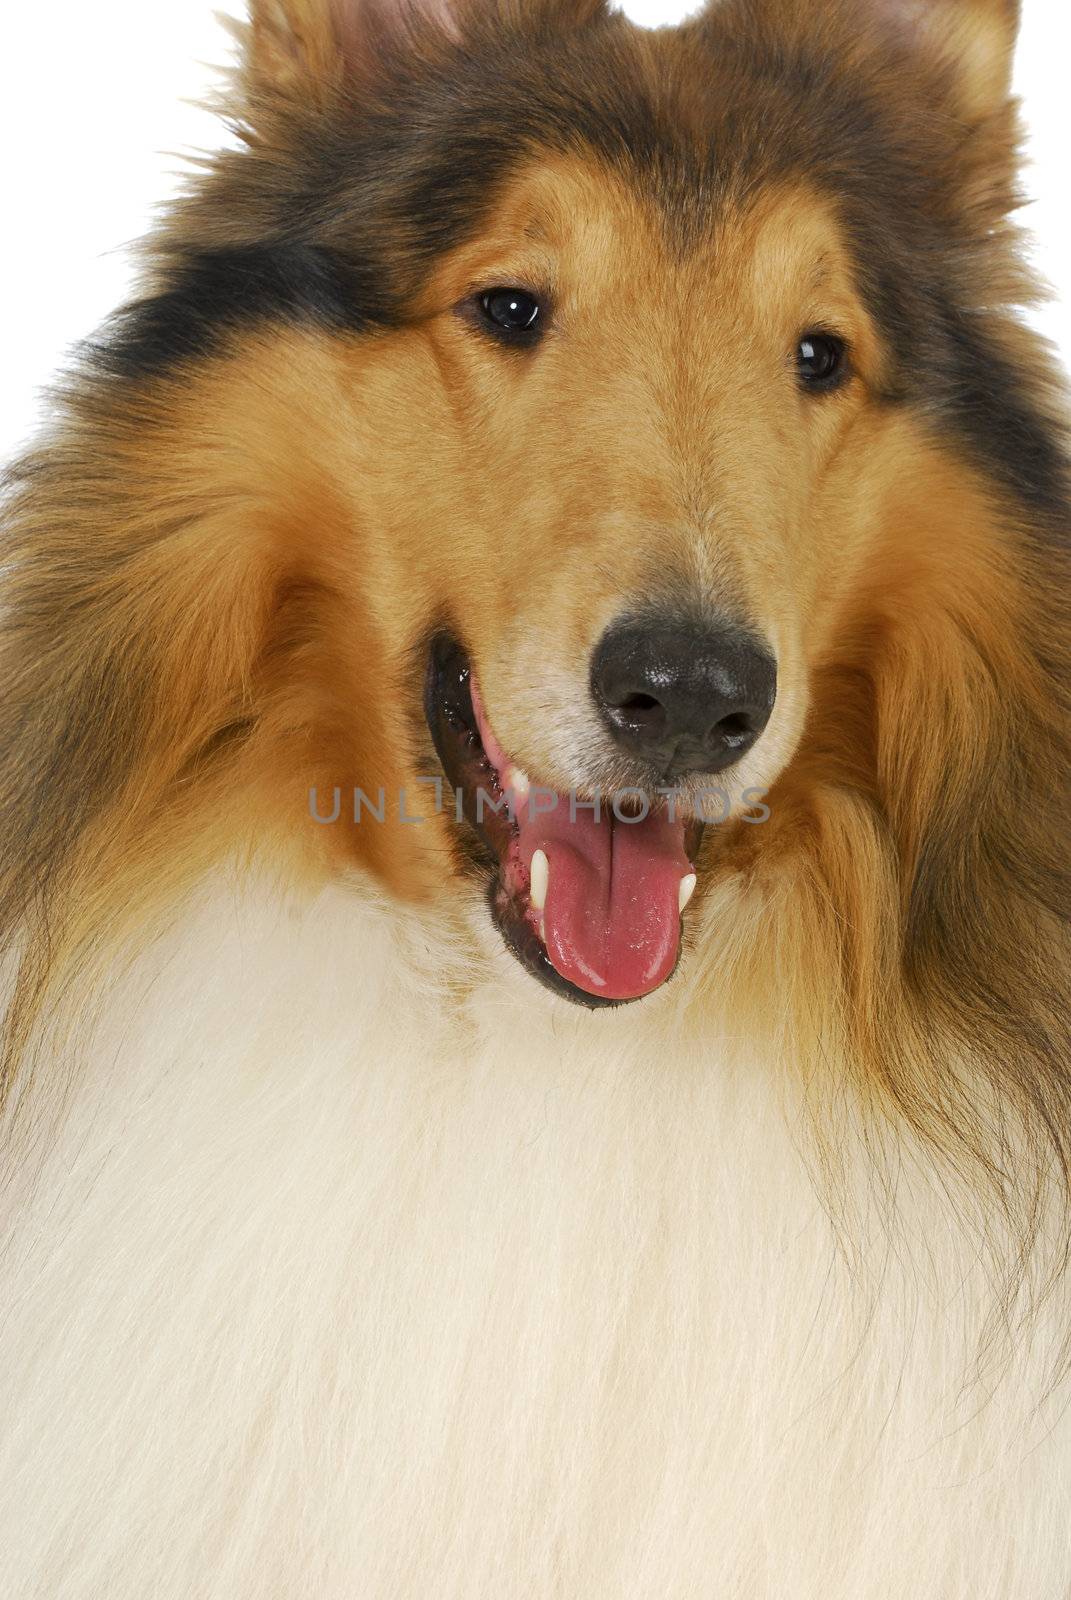 rough collie portrait on white background - male 2 years old